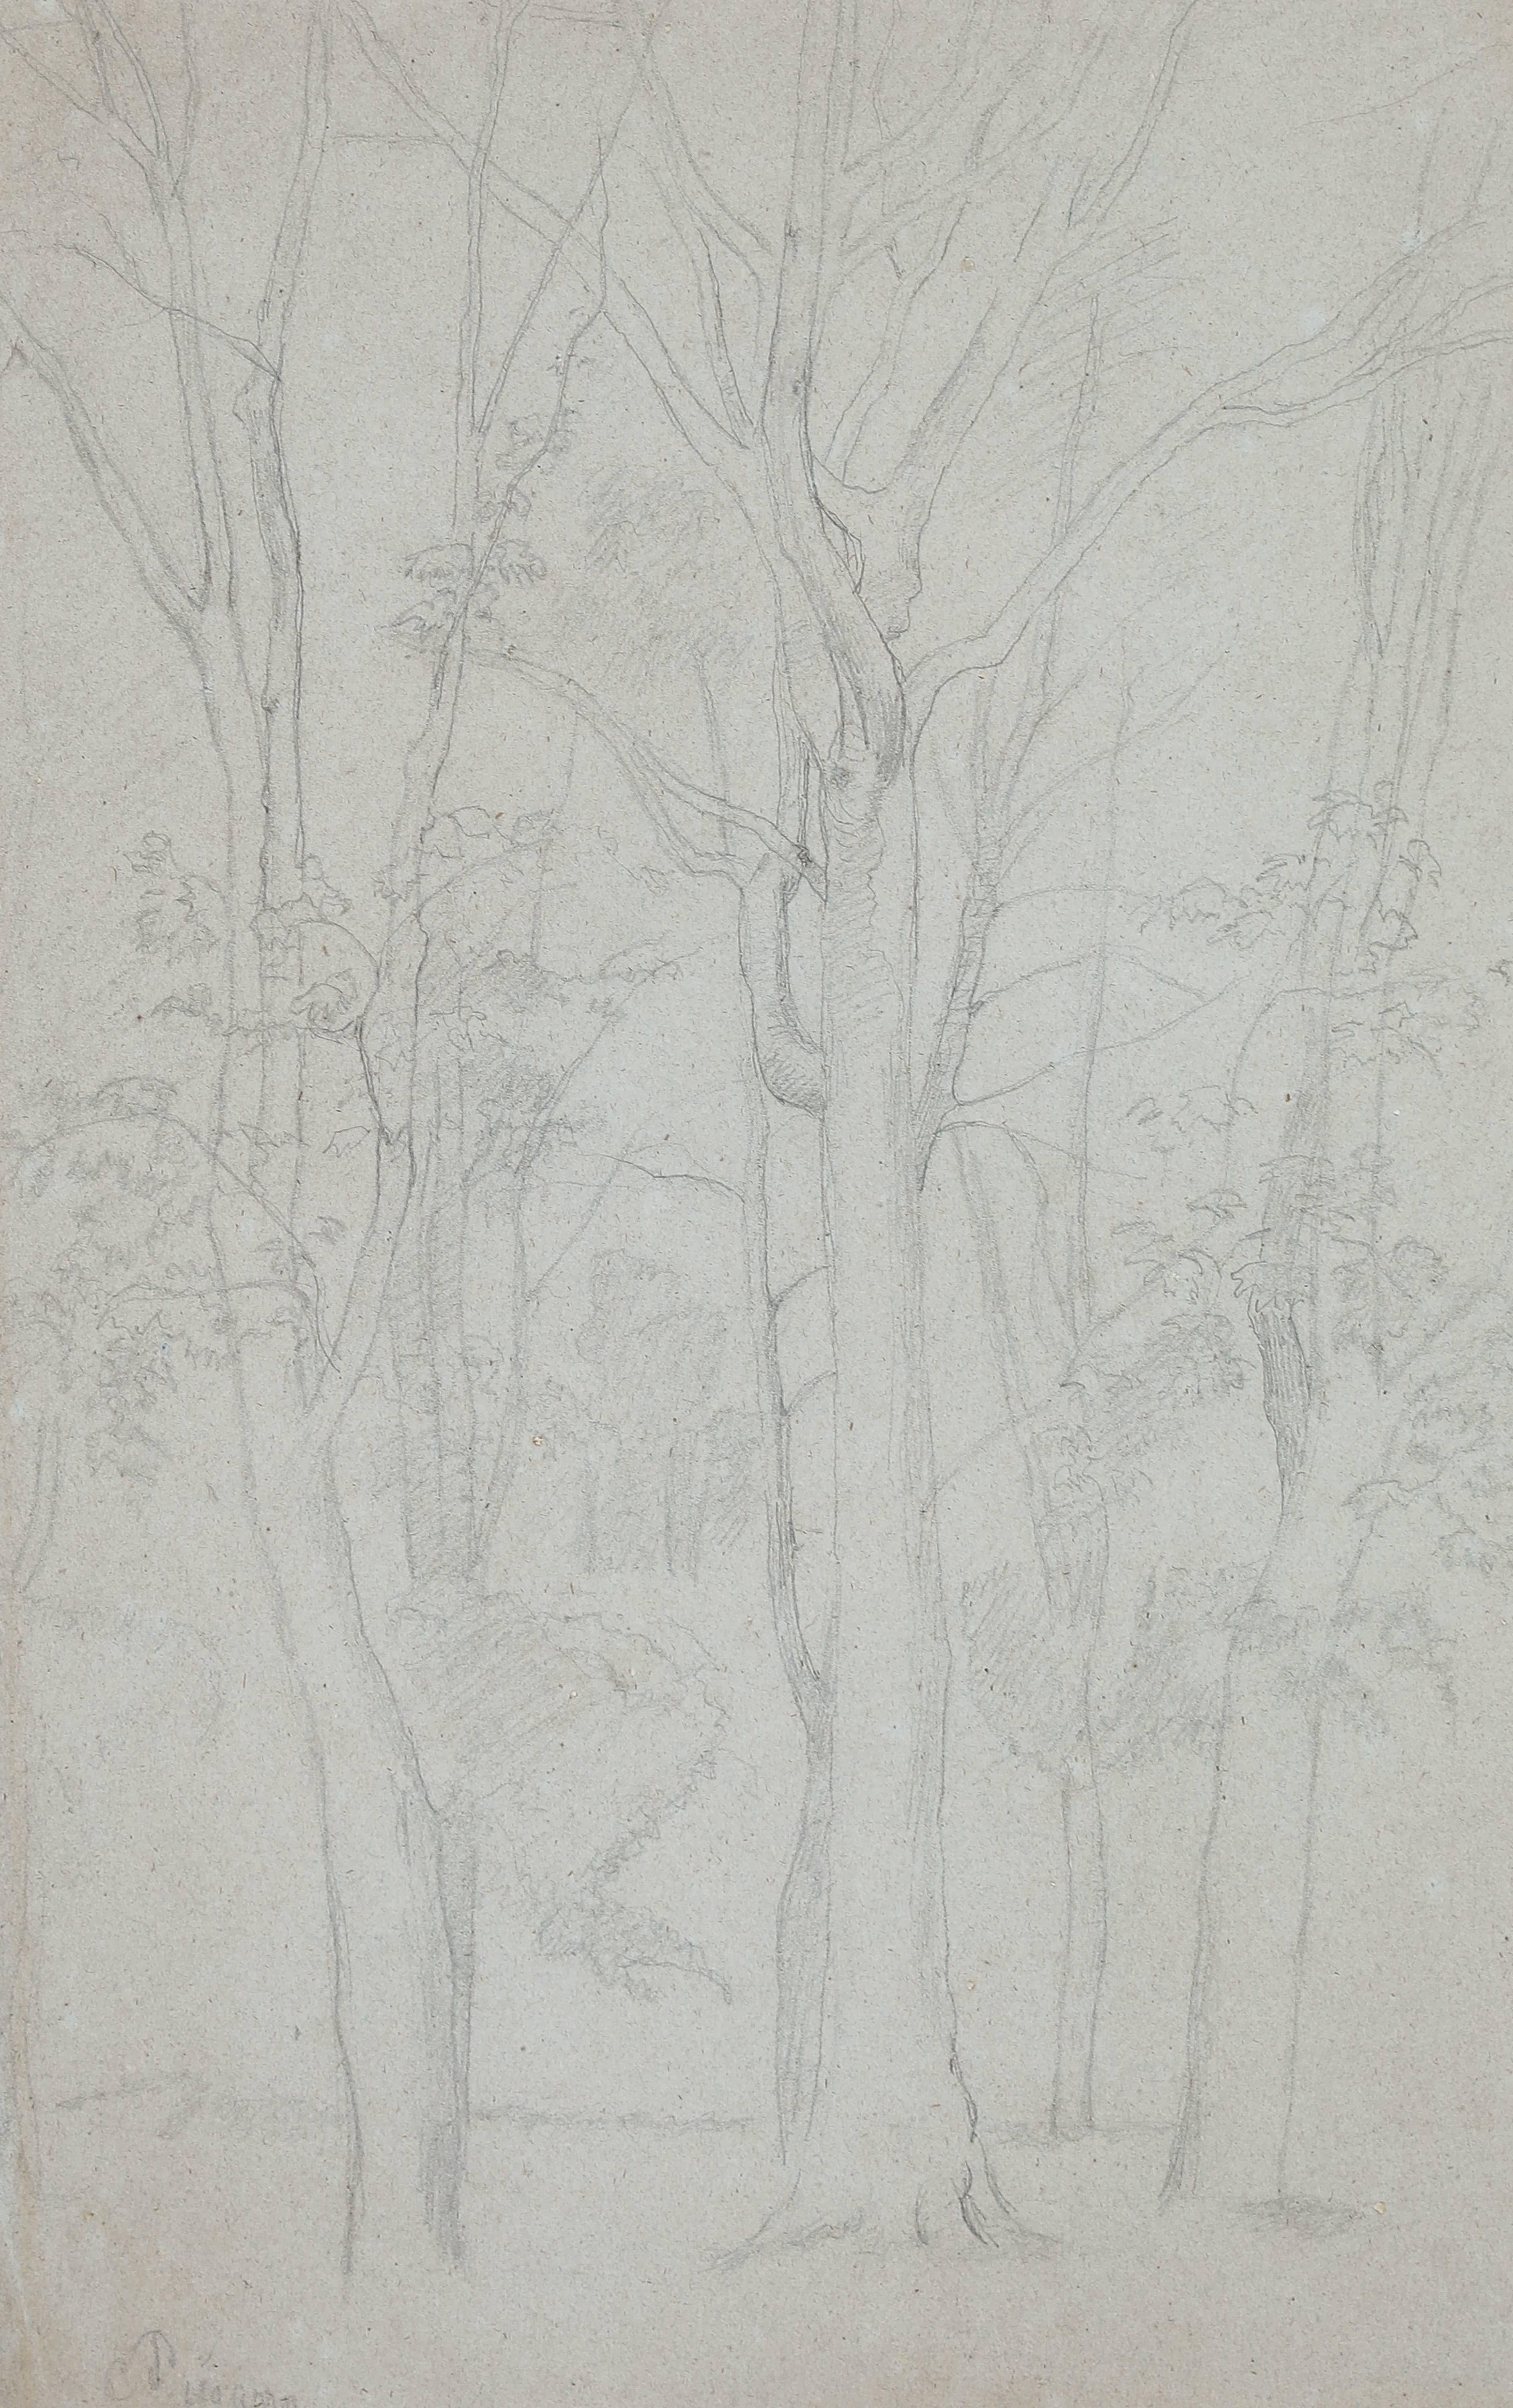 Arbres by Camille Pissarro (1830-1903)
Pencil on paper
44 x 28 cm (17 ³/₈ x 11 inches)
Signed lower left, C. Pissarro
Executed circa 1859

Influenced by the French countryside and by Corot and the Barbizon school, Camille Pissarro showed great